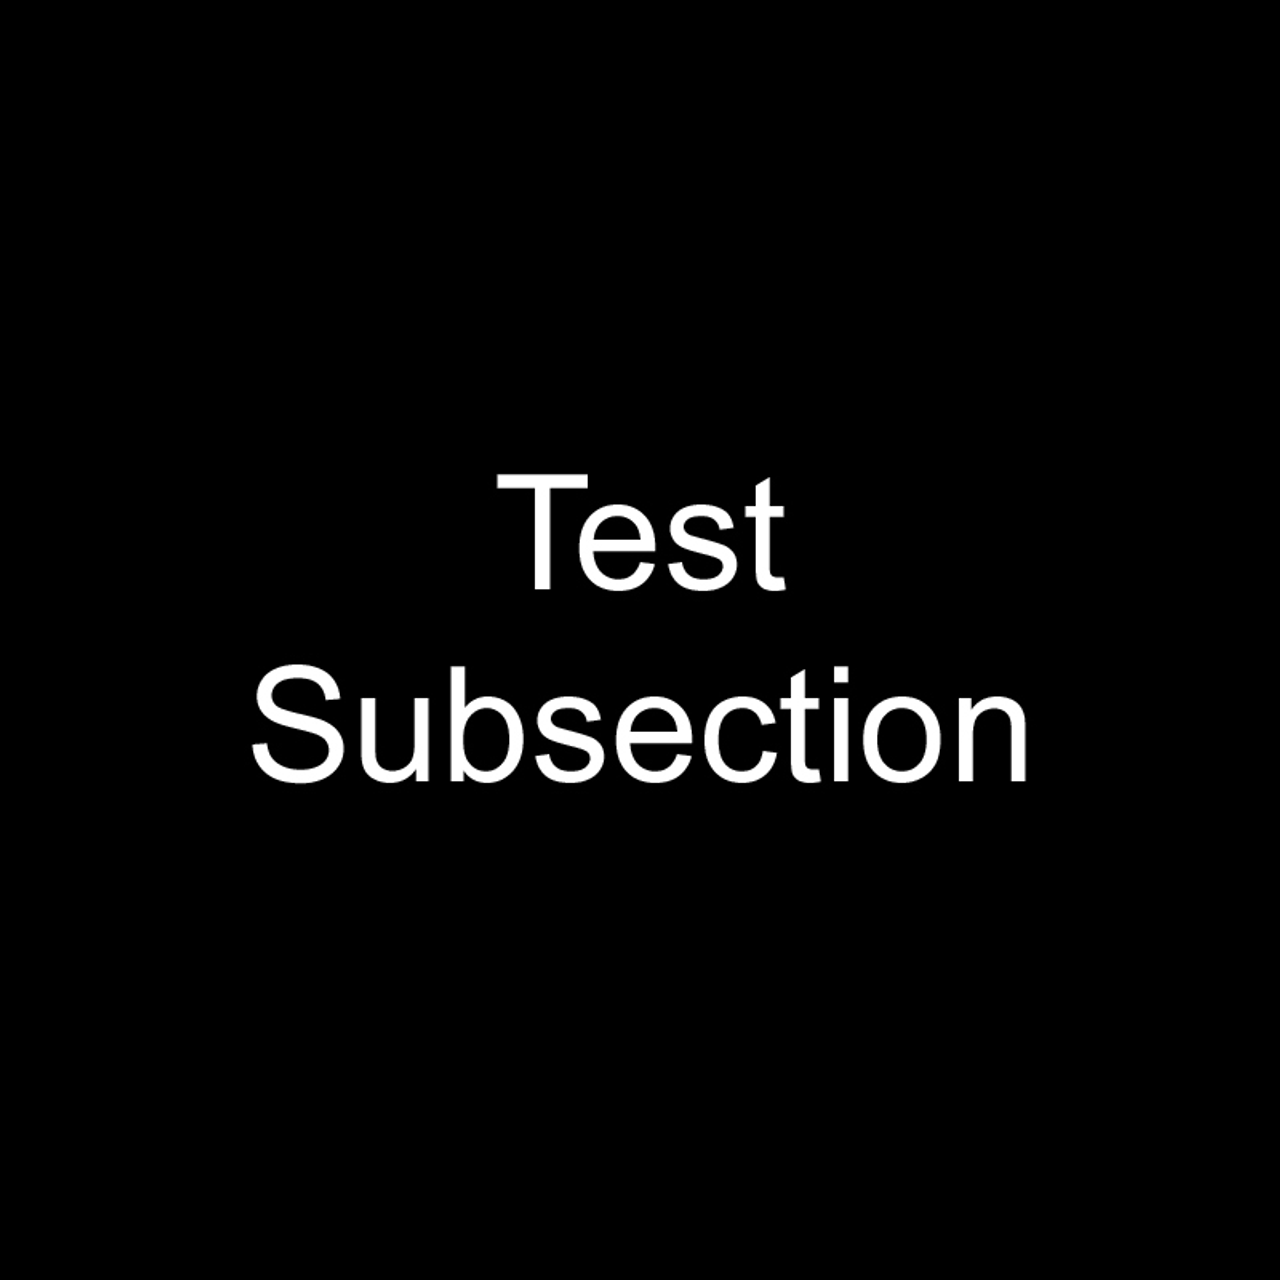 Test Subsection